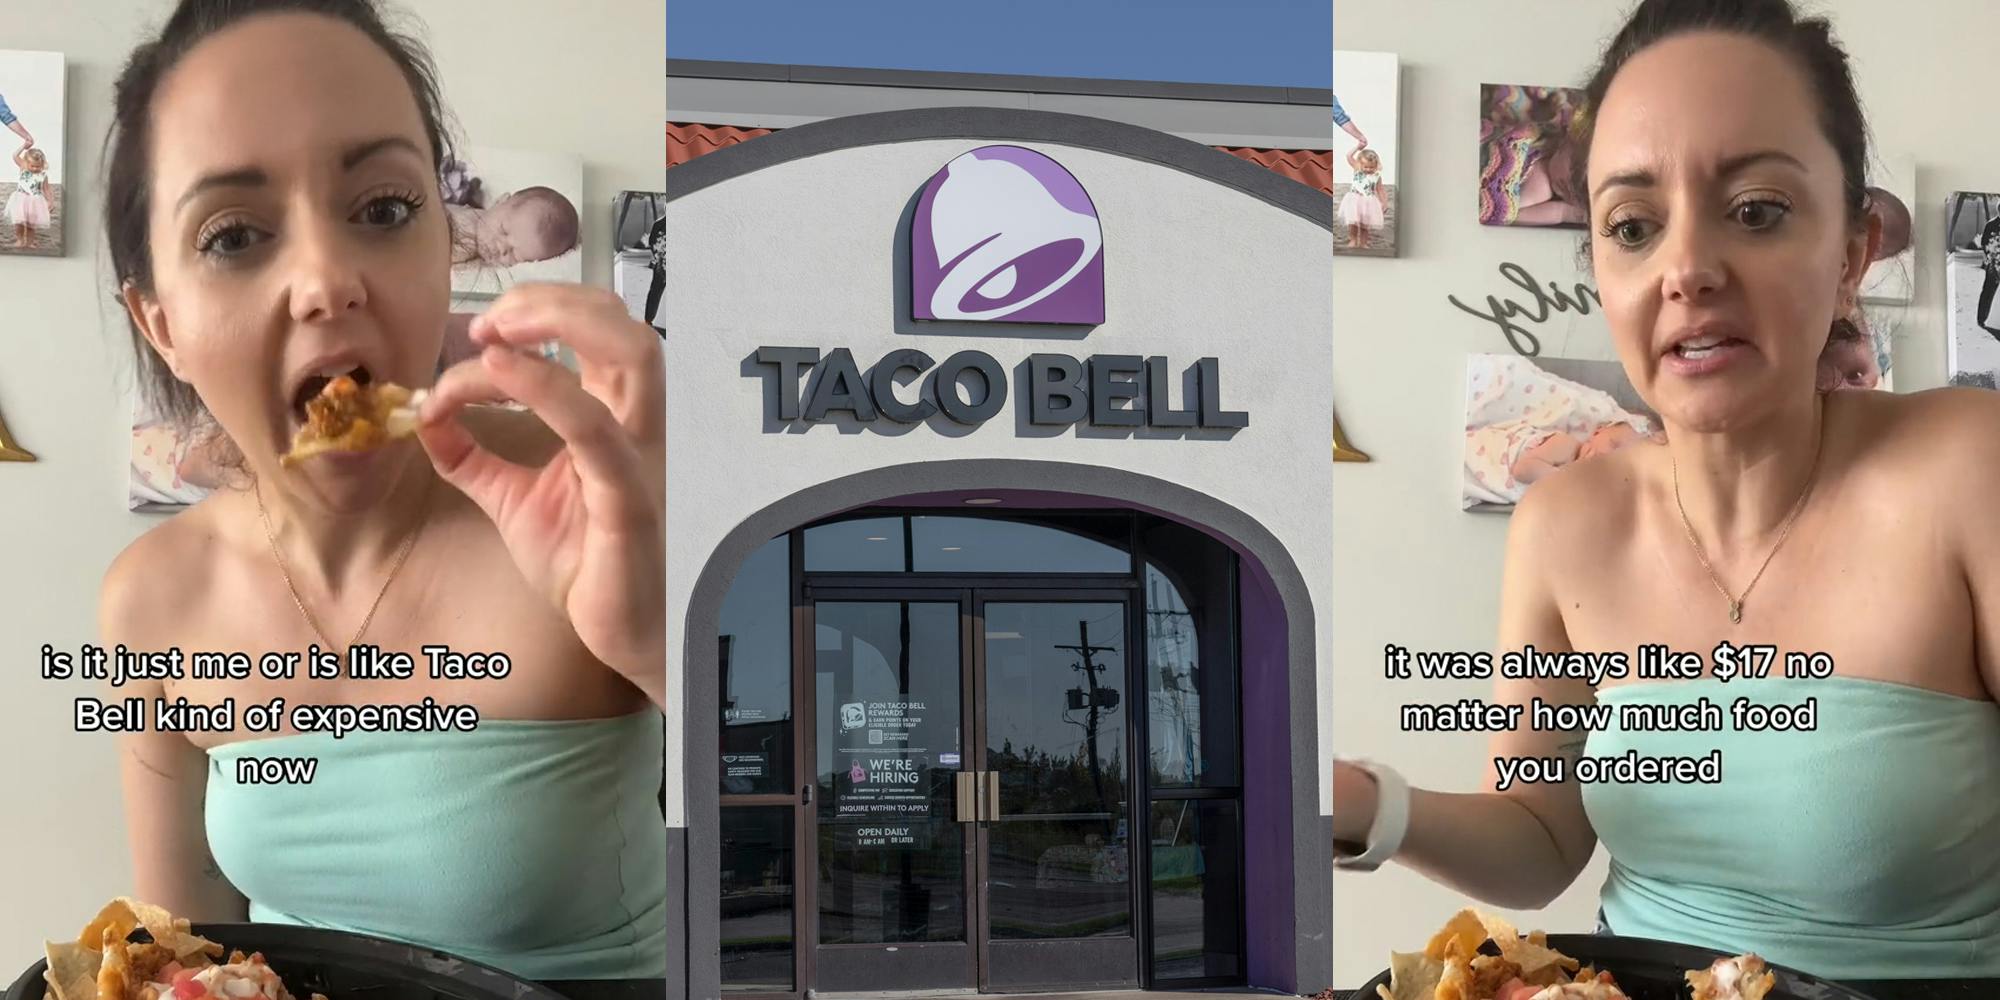 Taco Bell customer eating with caption "is it just me or is Taco Bell kind of expensive now" (l) Taco Bell building with sign (c) Taco Bell customer speaking with caption "it was always like $17 no matter how much food you ordered" (r)